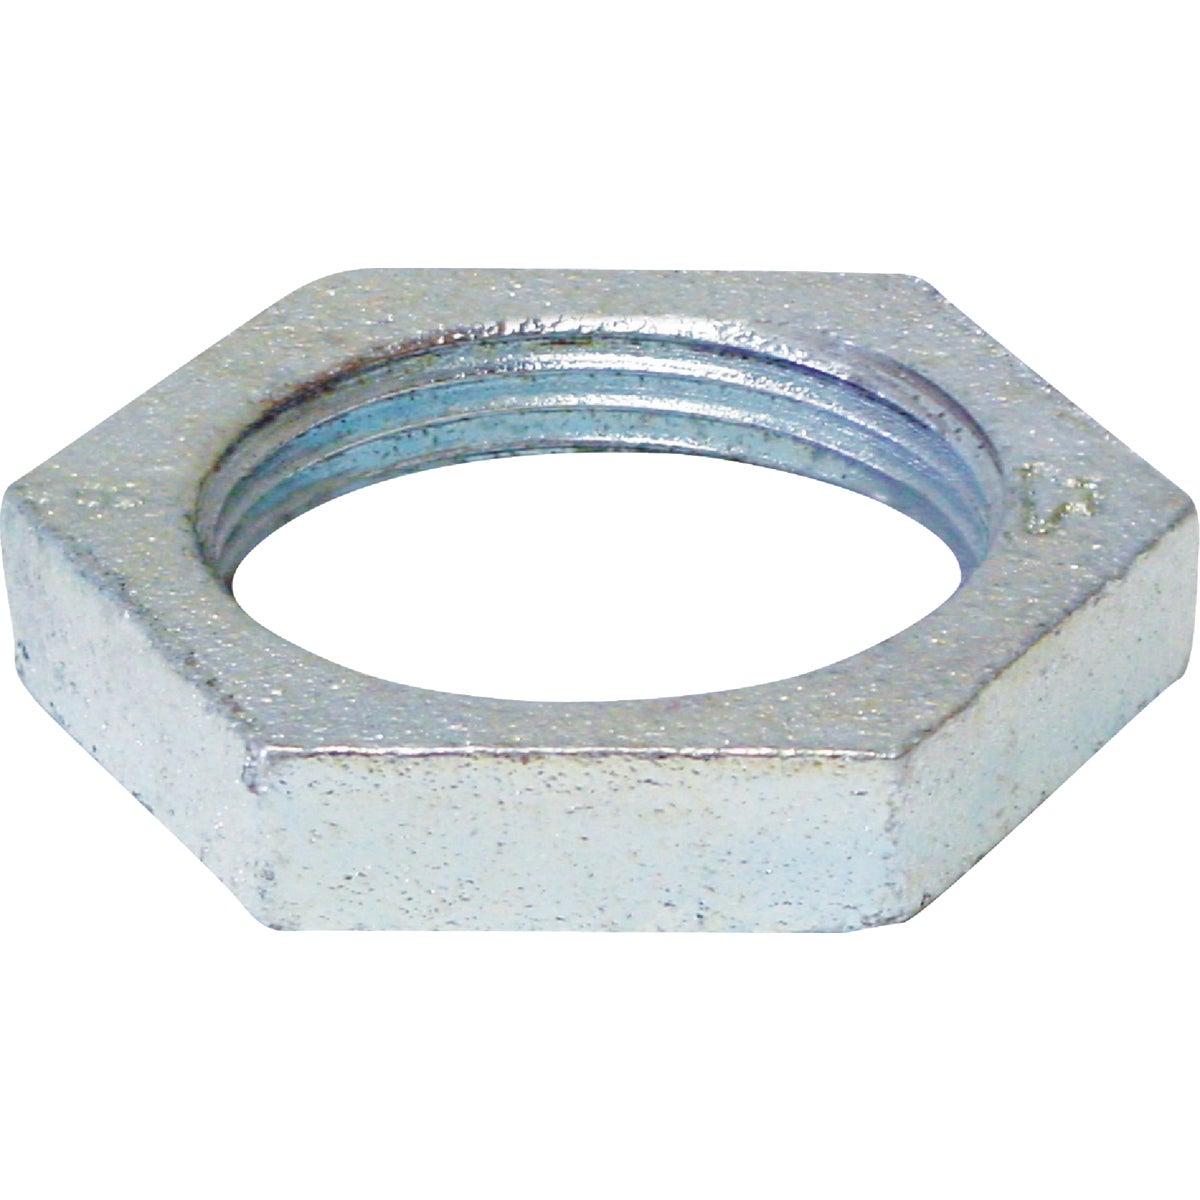 Item 422796, Malleable iron. Standard Malleable Iron Fittings, Fed. Spec.